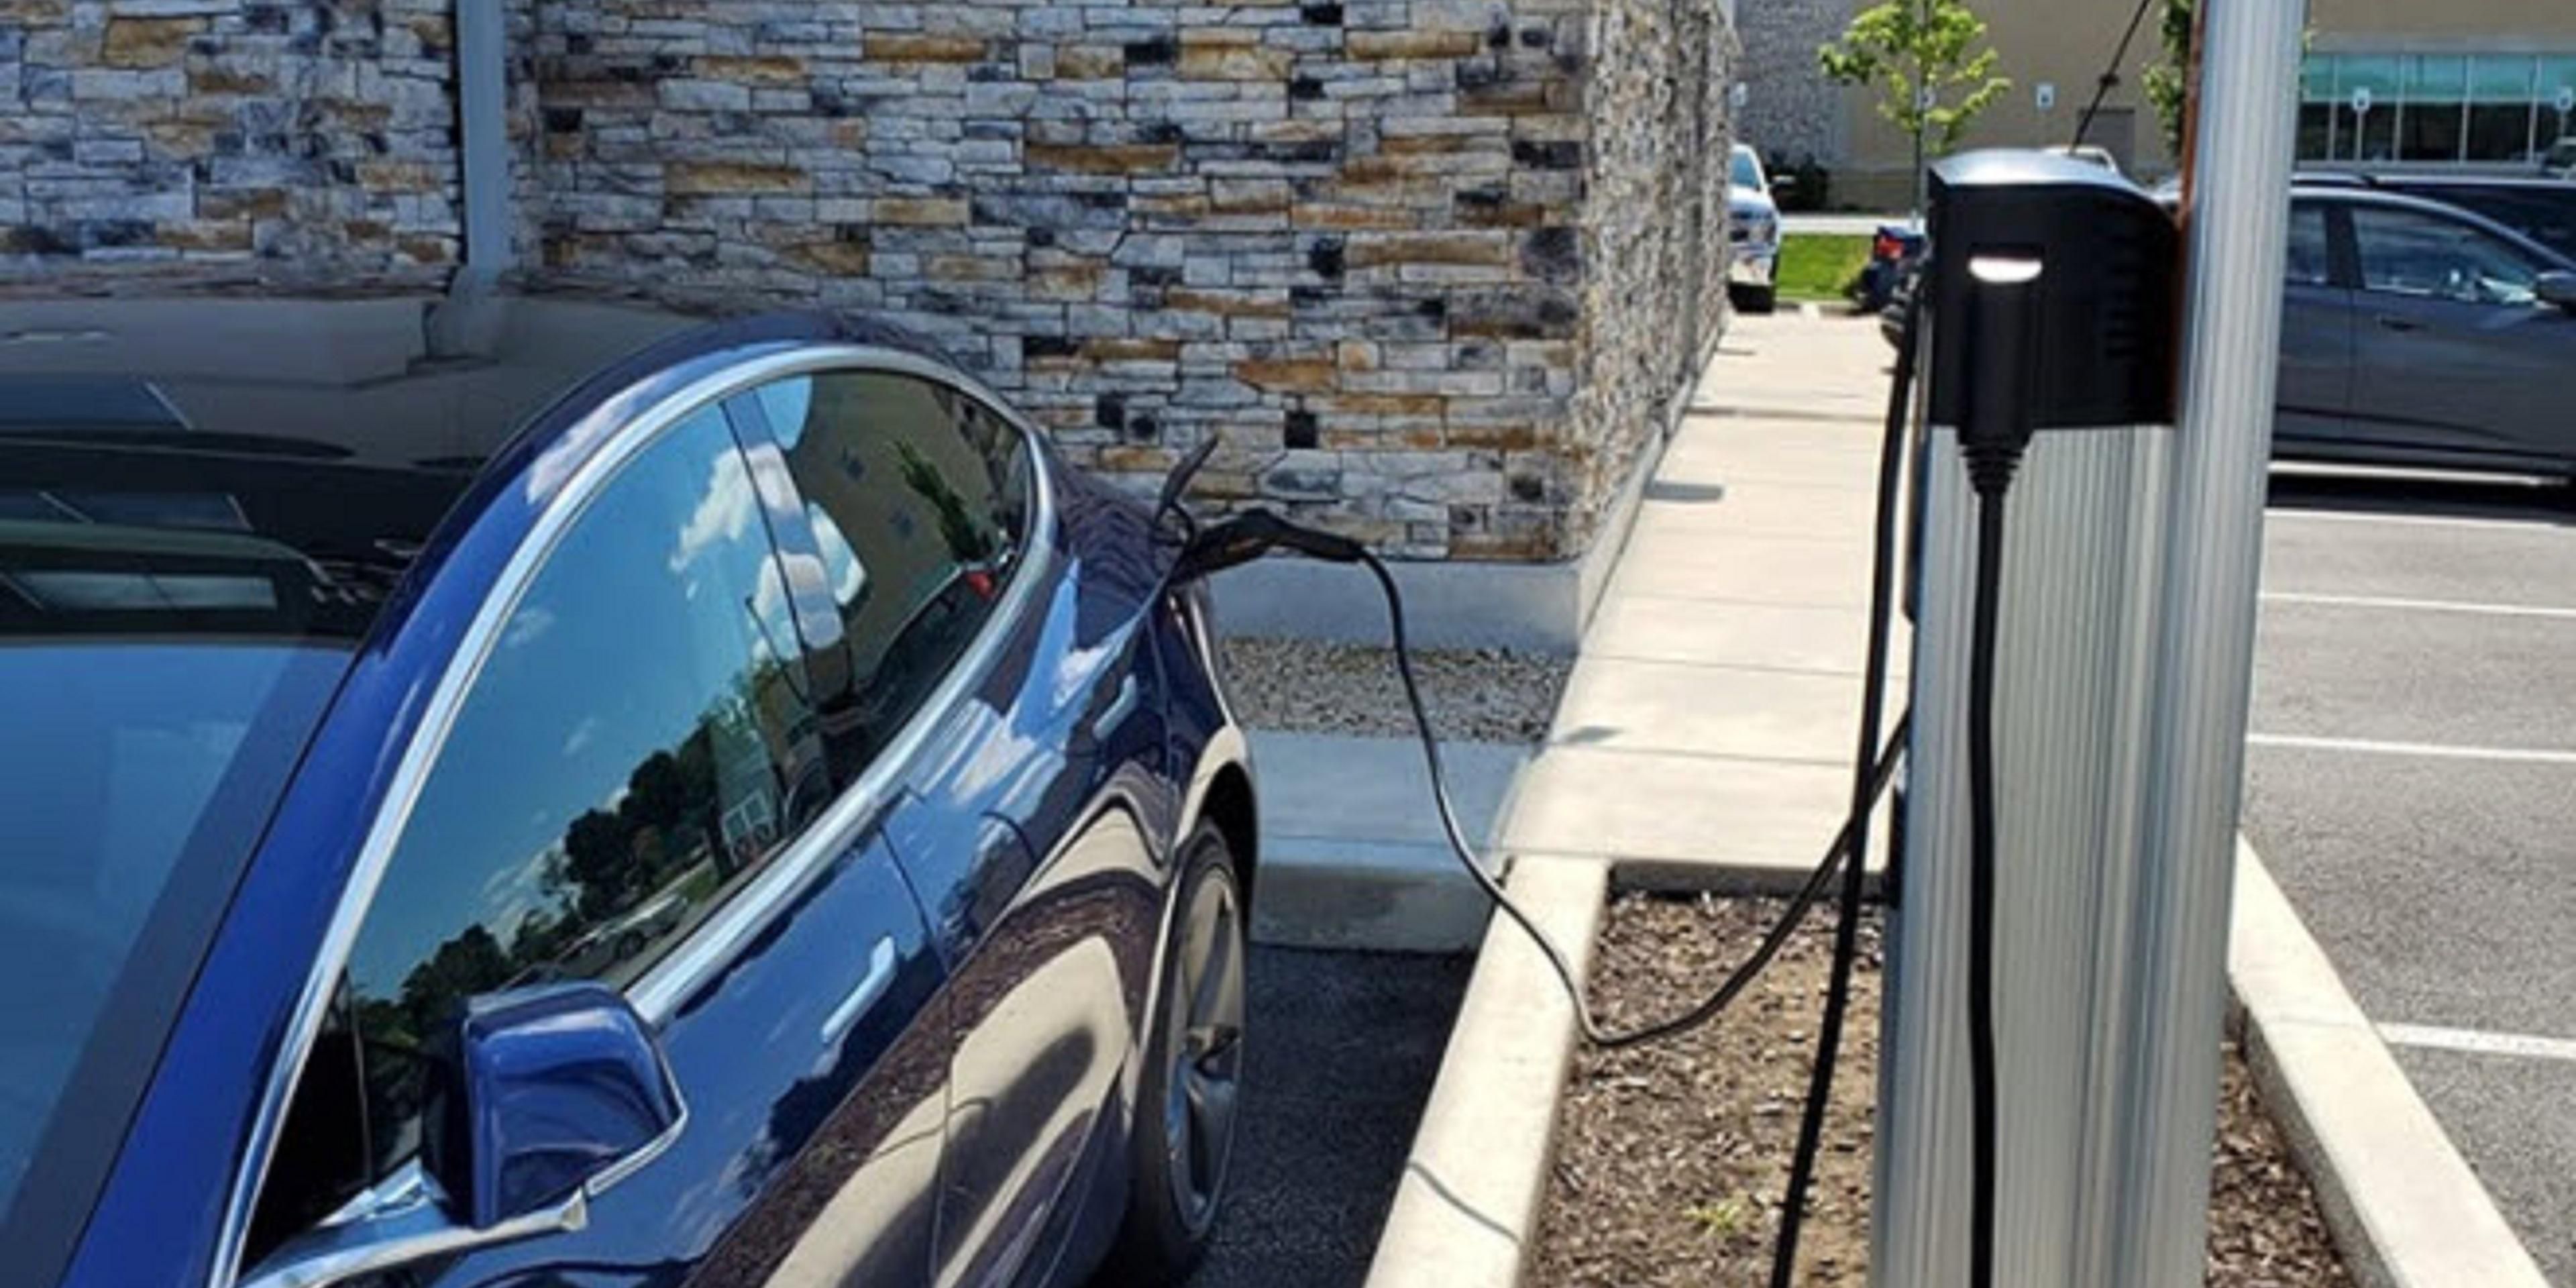 Have an electric car that needs a charge? No Problem! We have you covered. Stop in, plug in, and recharge, both your car and you! Two chargers available and they utilize the ChargePoint app.  